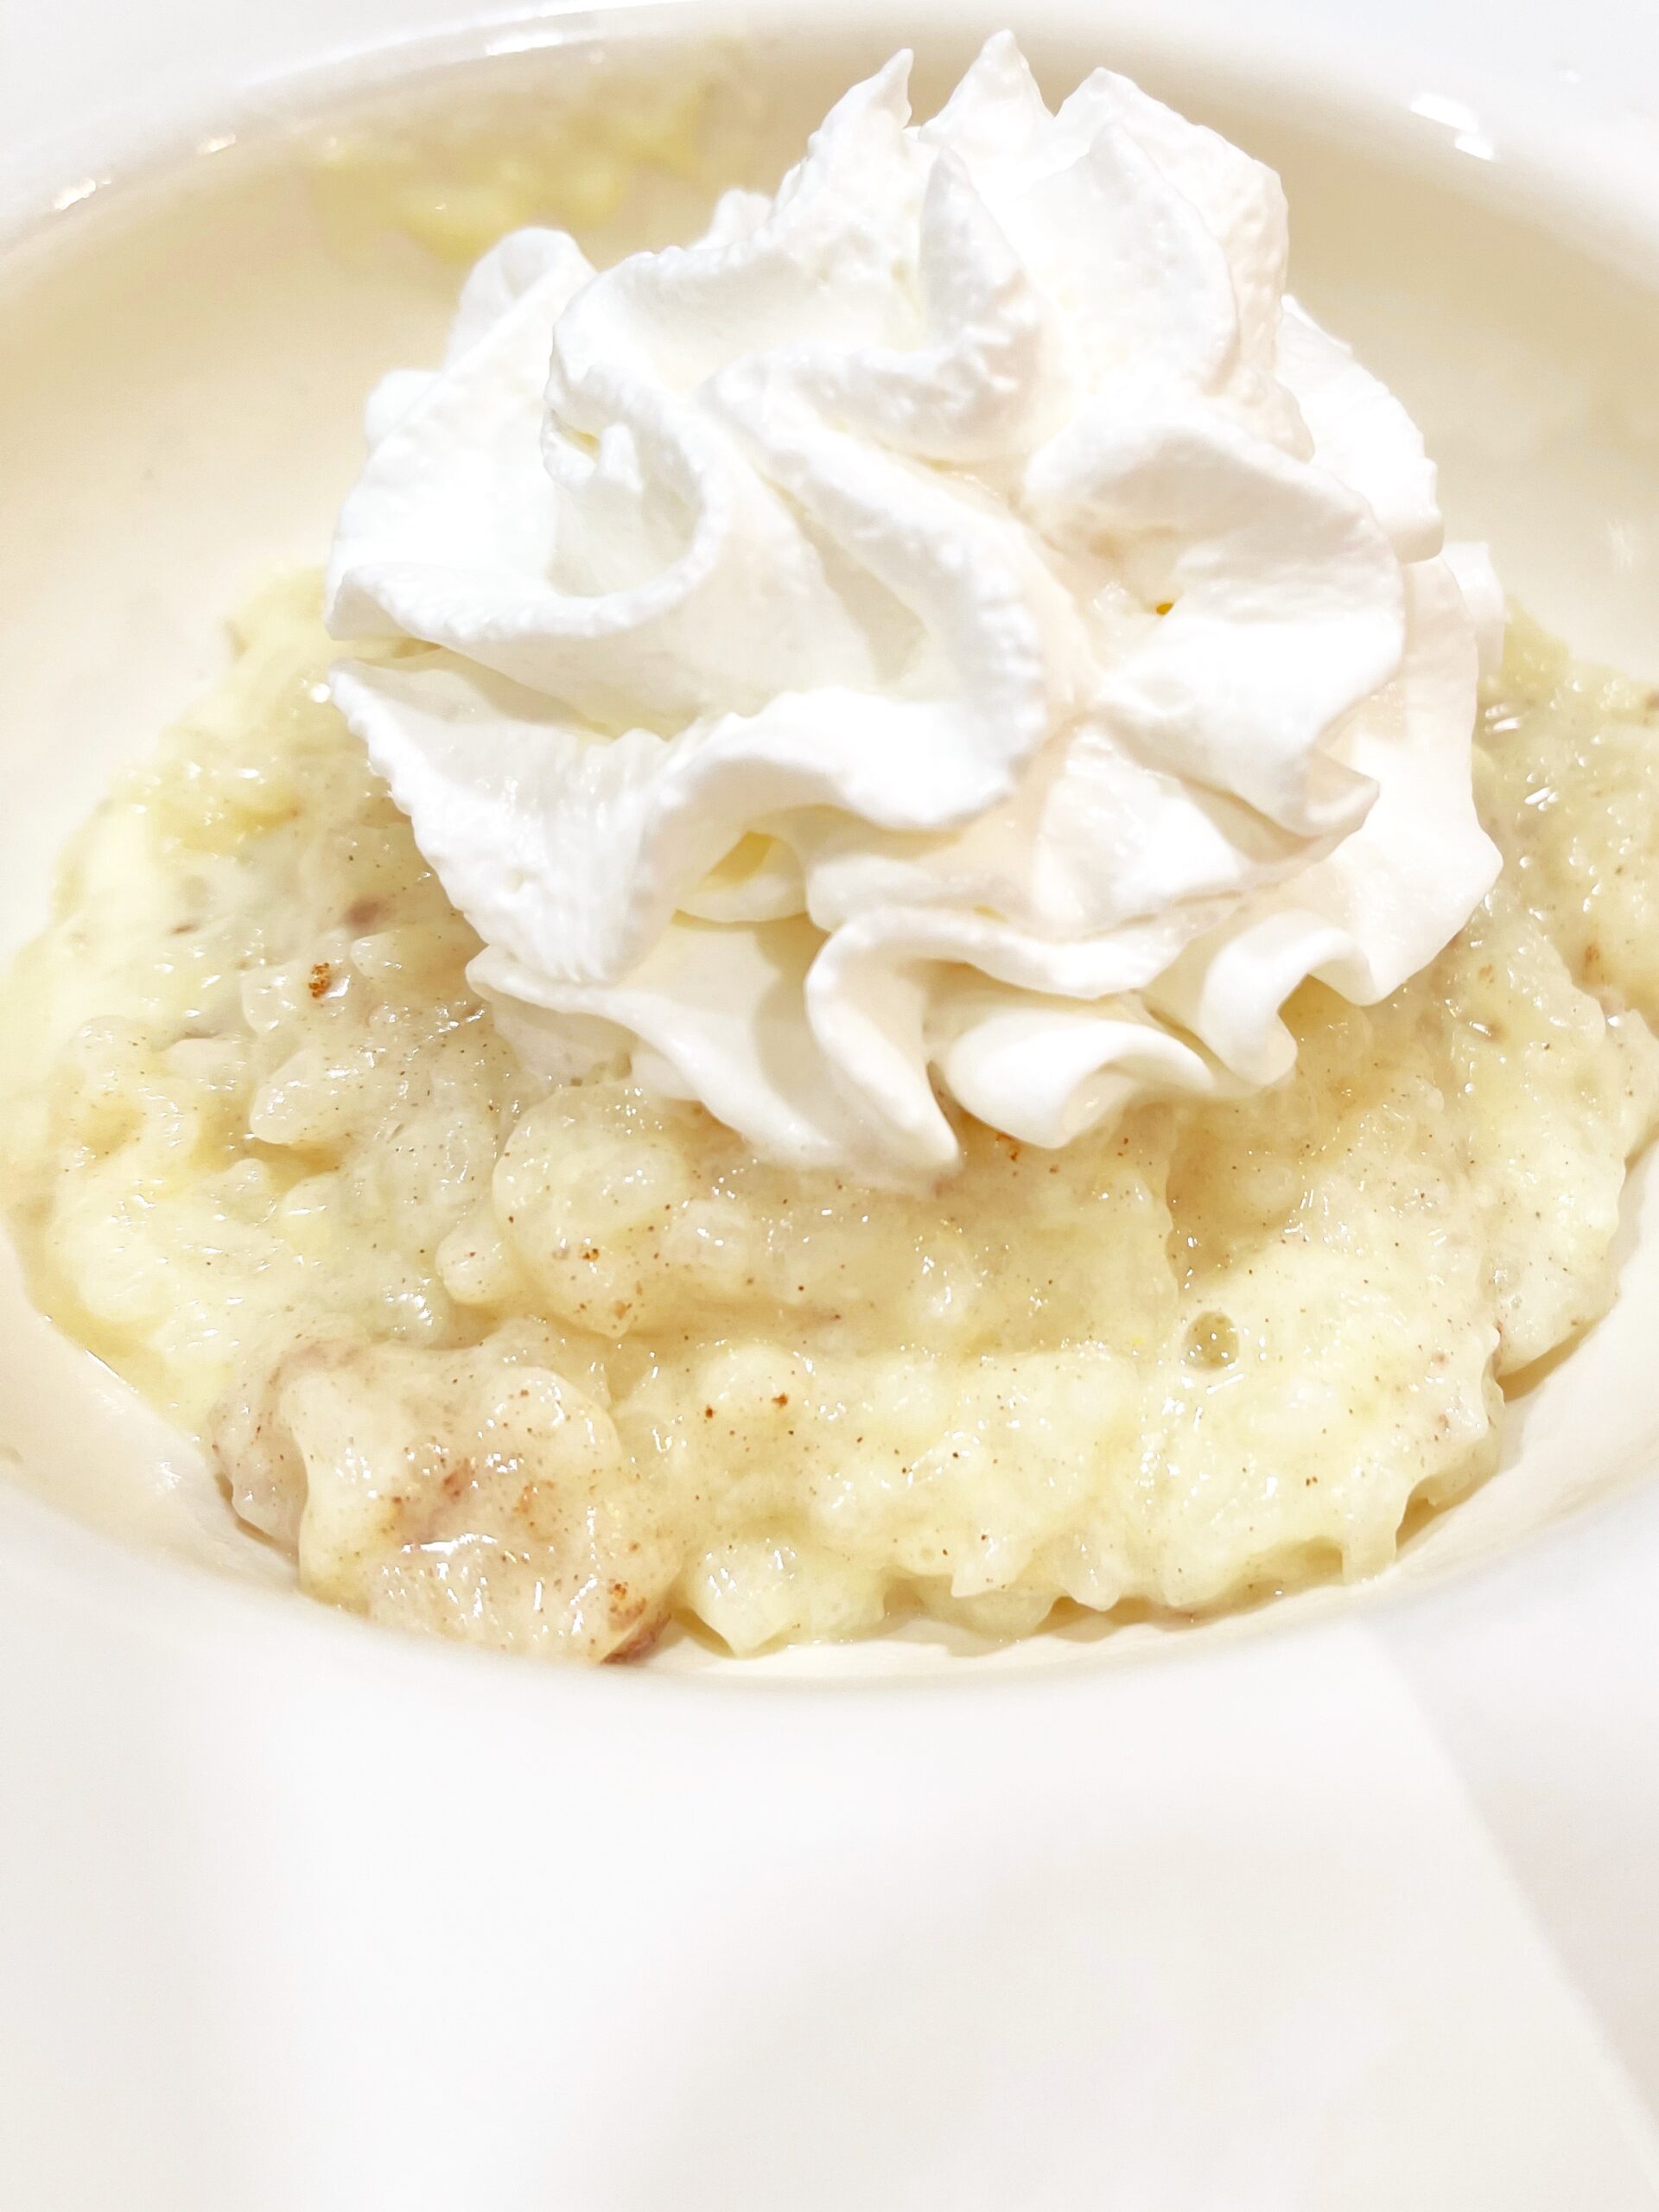 How to Make Rice Pudding From Scratch